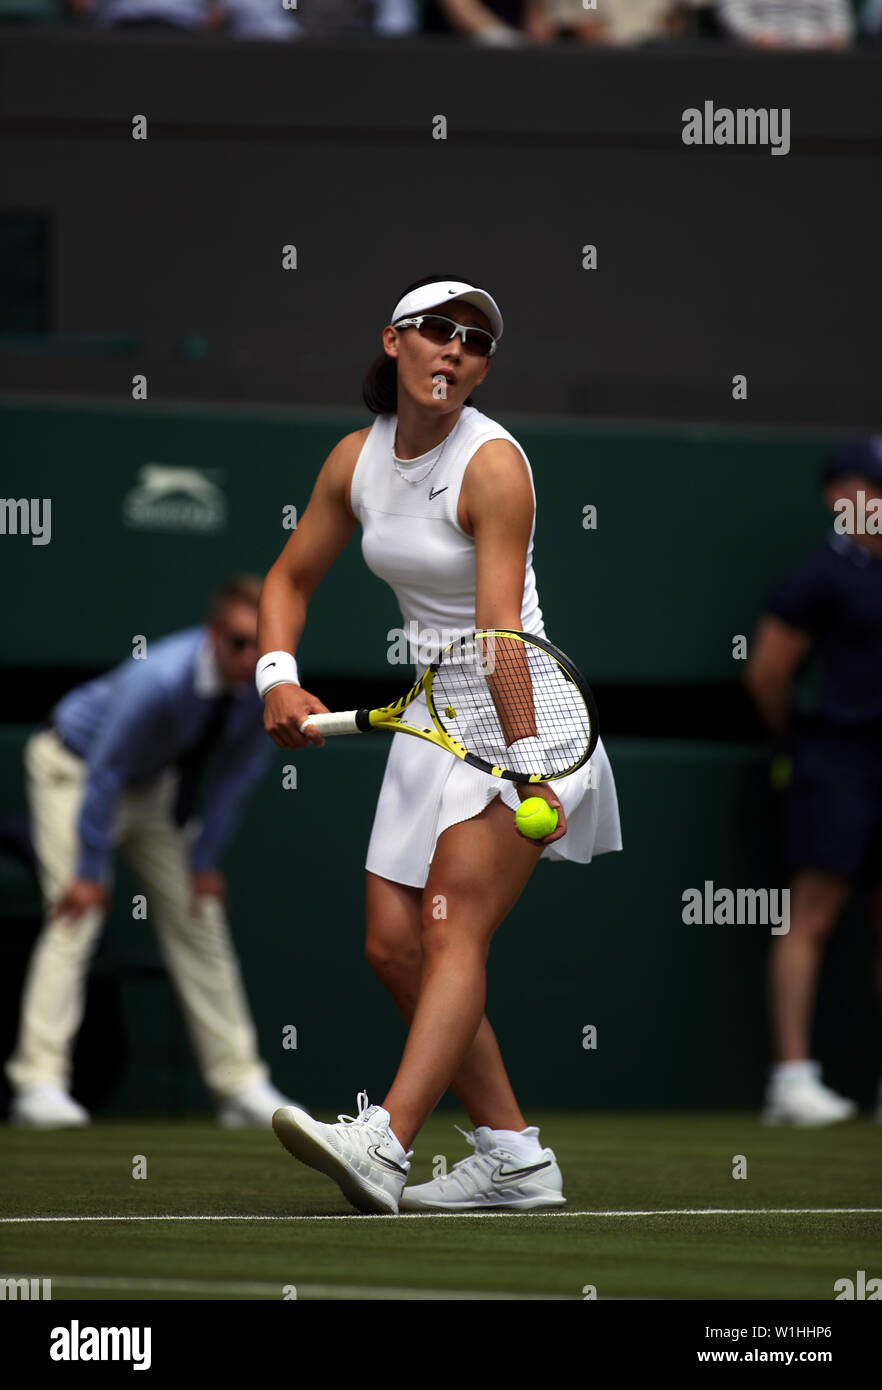 Wimbledon, London, UK. 2nd July 2019. Saisai Zheng of China hits a return to Australia's Ash Barty during their first round match at Wimbledon today.  Barty won the match in straight sets. Credit: Adam Stoltman/Alamy Live News Stock Photo